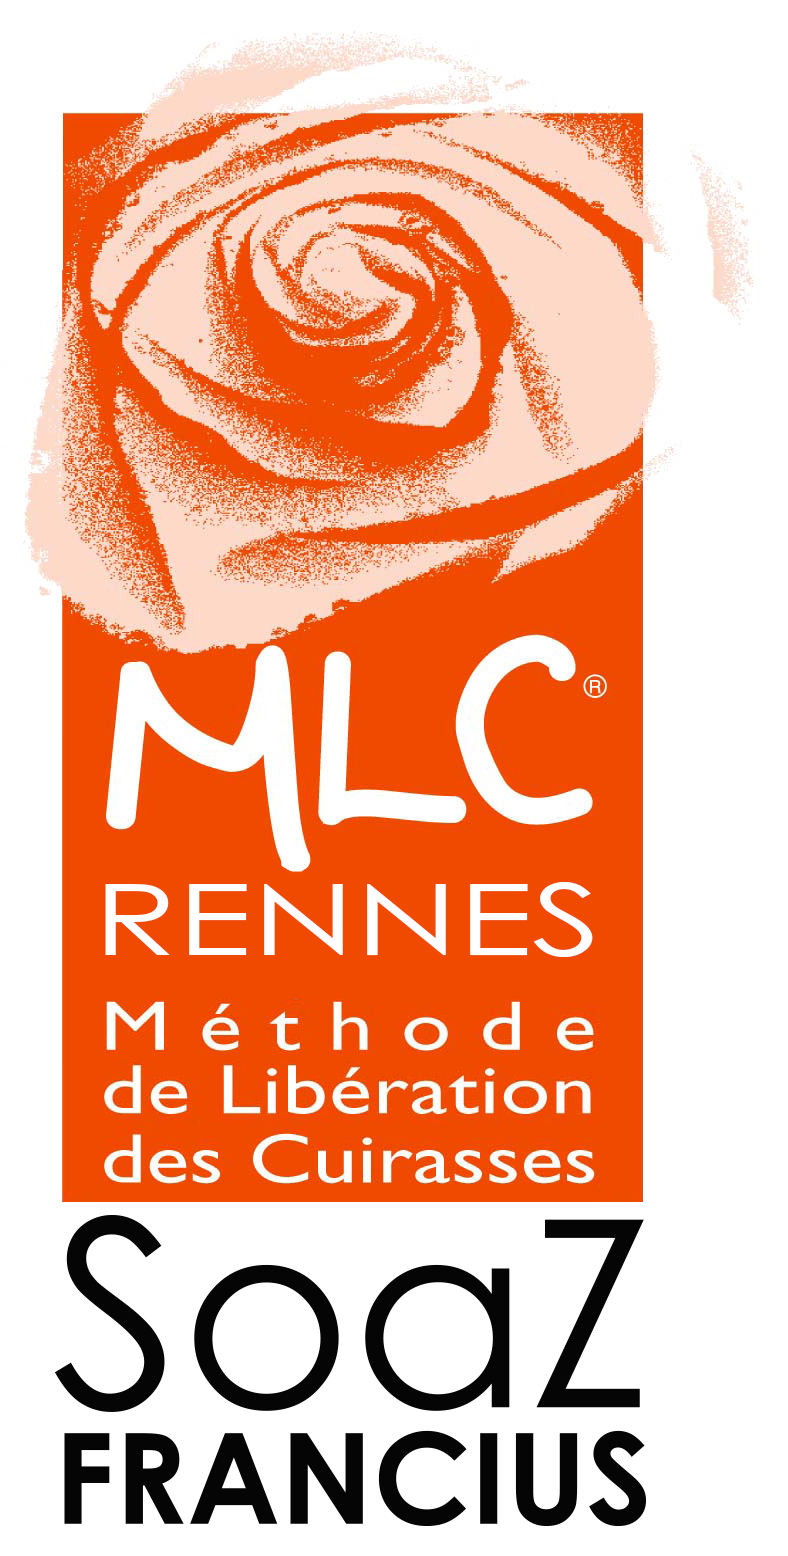 Cycle MLC Rennes